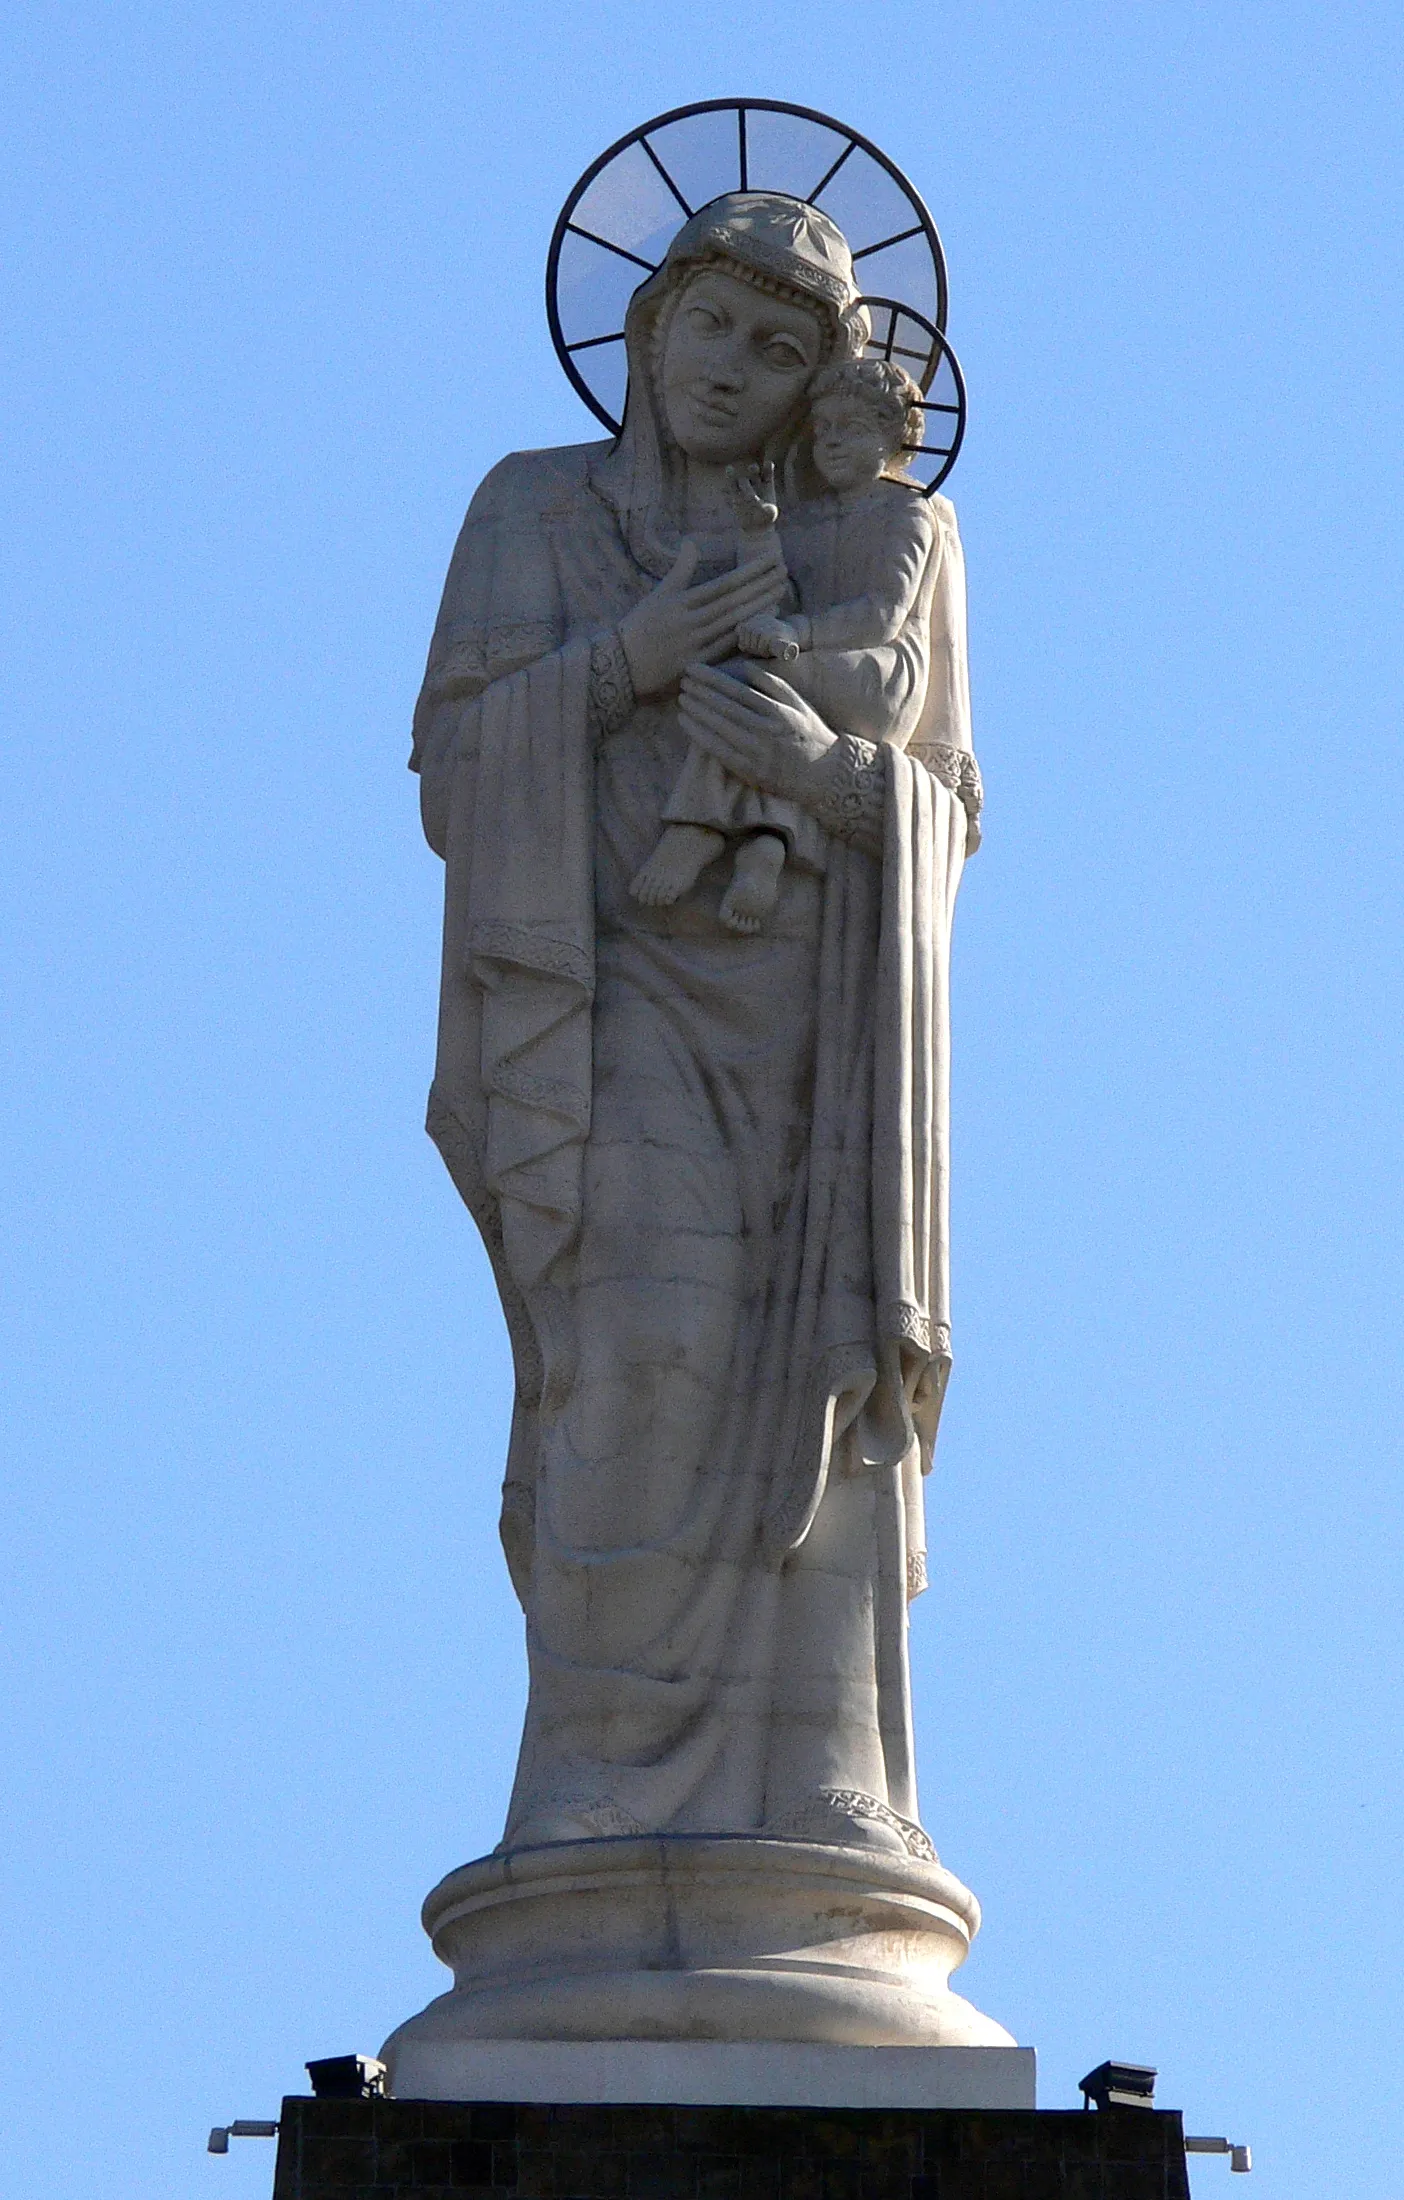 Photo showing: The Monument of the Holy Mother of God, the world's highest monument to Virgin Mary in Haskovo, Bulgaria.